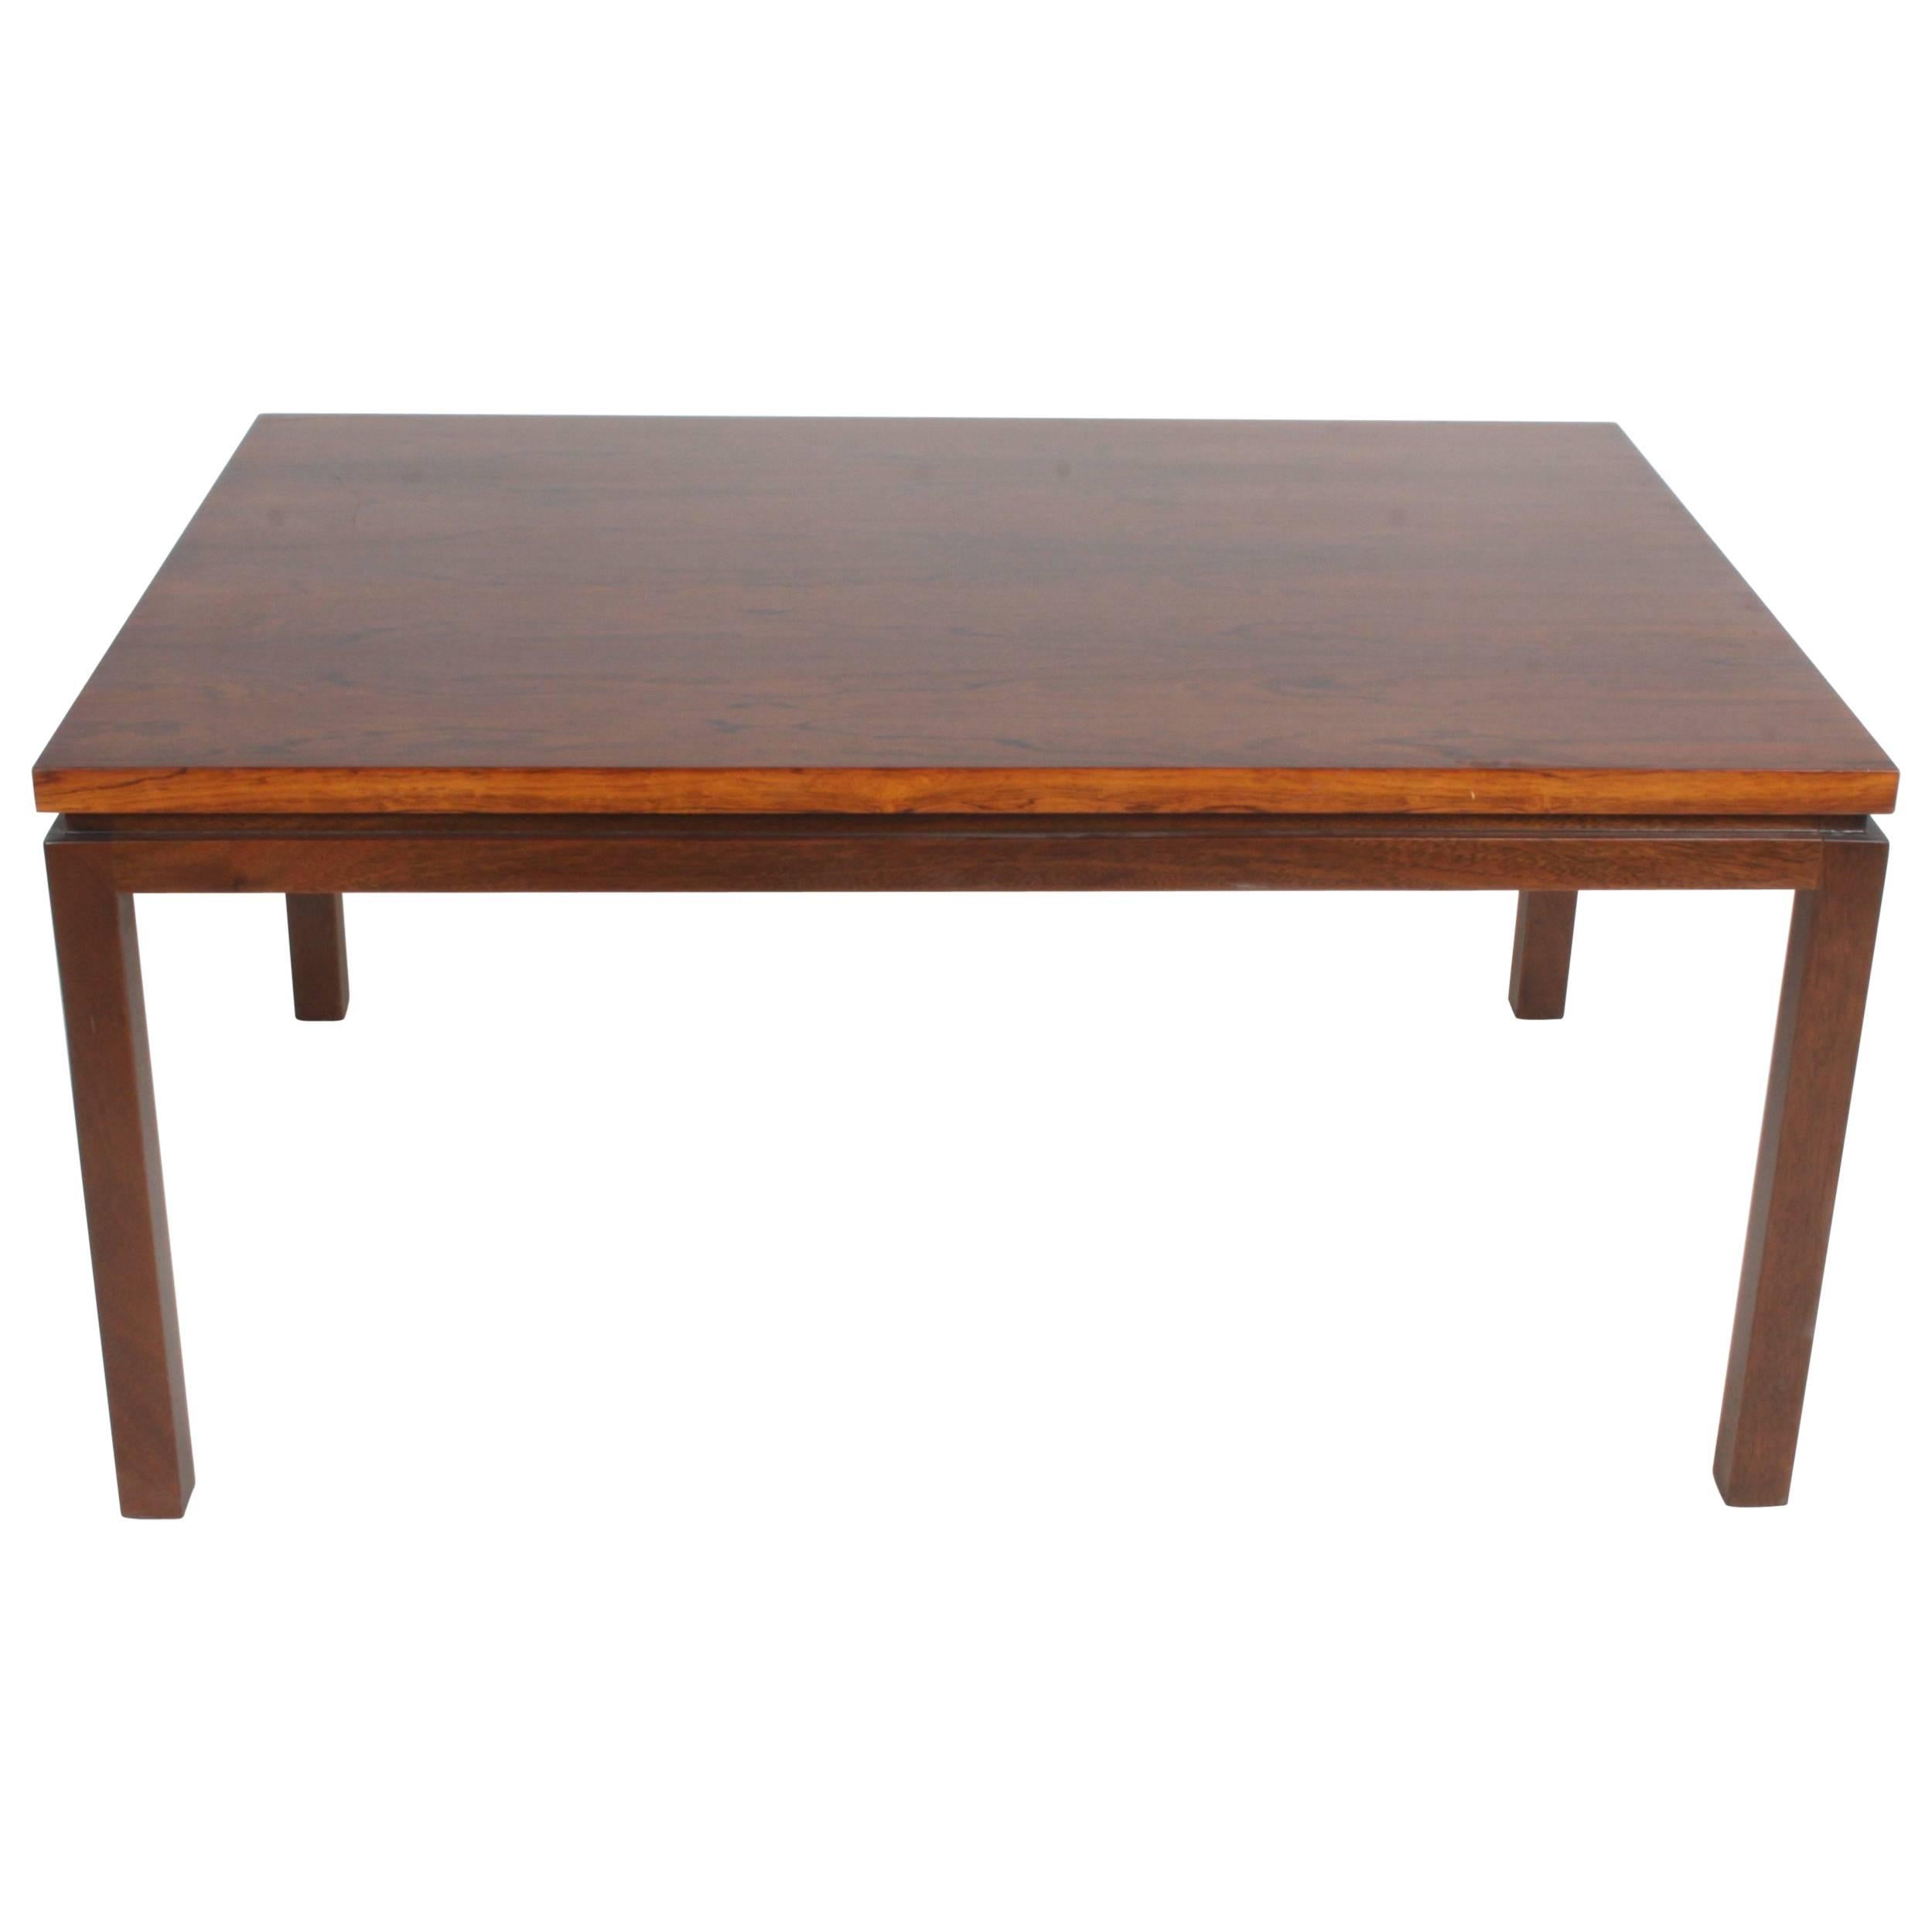 Harvey Probber Rosewood Top & Mahogany Legs Rectangular Parson Coffee Table For Sale